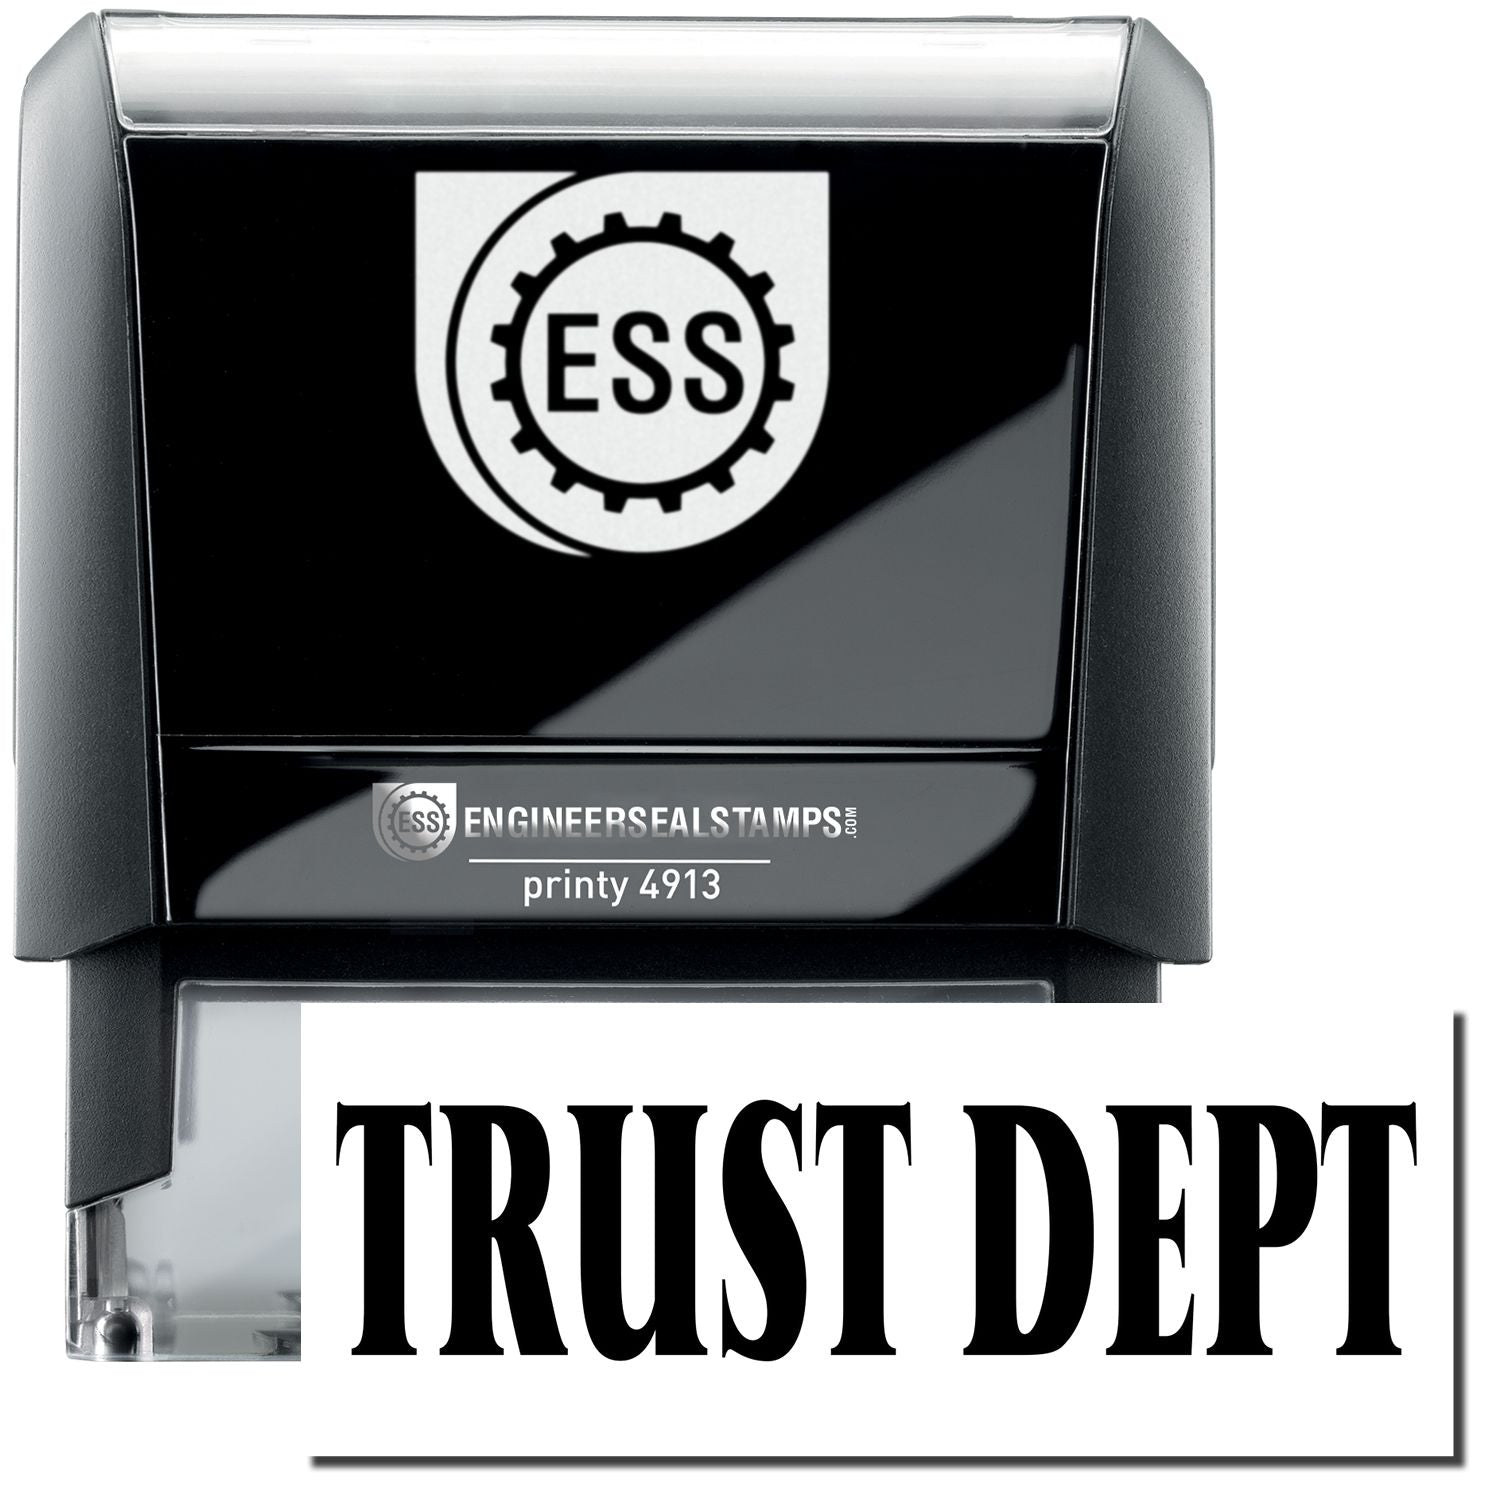 A self-inking stamp with a stamped image showing how the text "TRUST DEPT" in a large bold font is displayed by it.